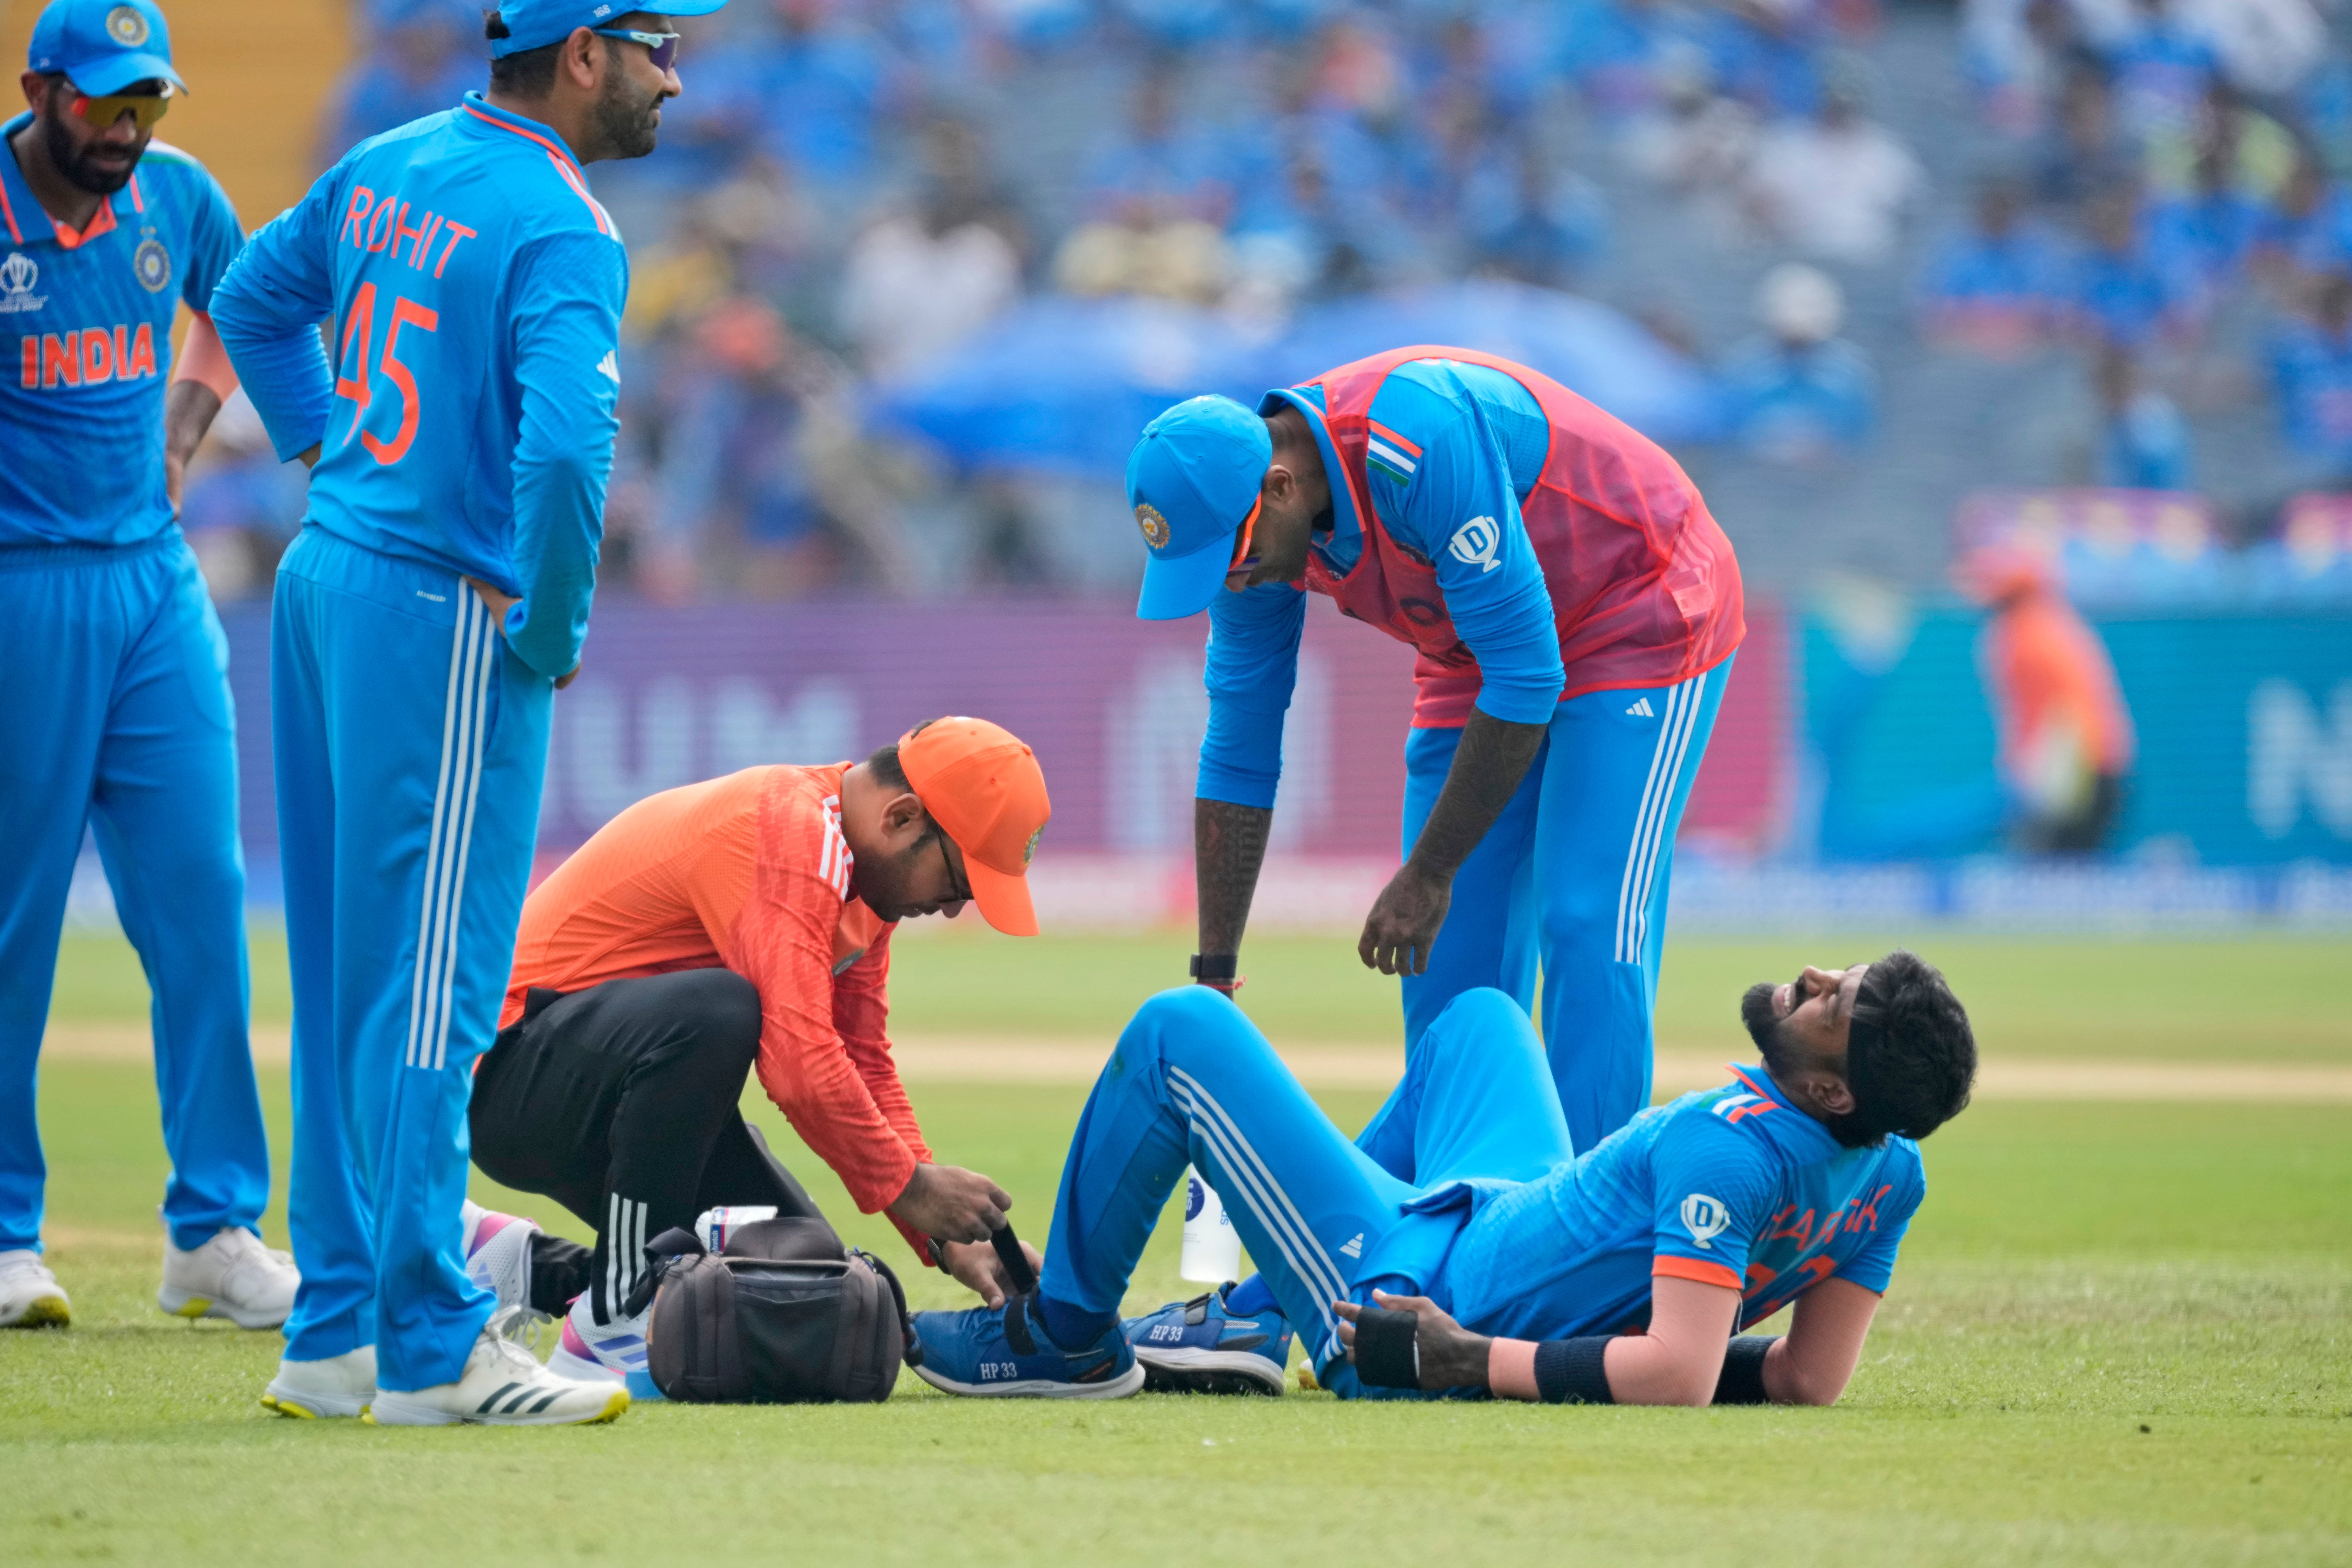 India’s Hardik Pandya receives medical treatment after being injured during the ICC Men’s Cricket World Cup match between India and Bangladesh on 19 October